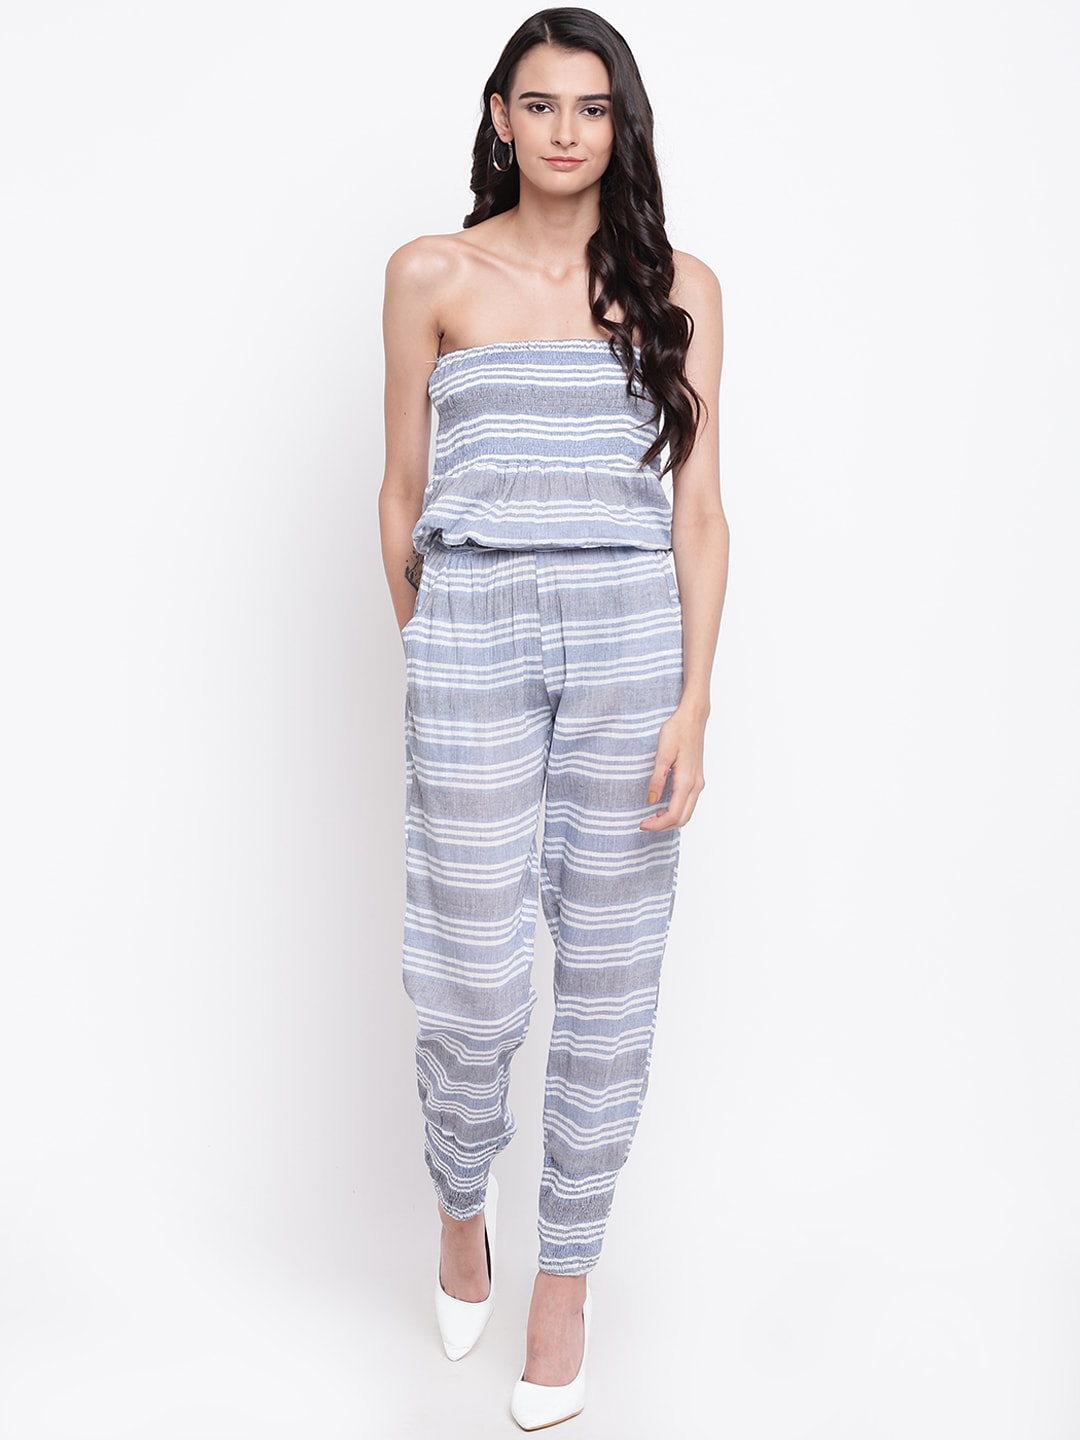 Belle Fille Blue & White Striped Basic Jumpsuit Price in India